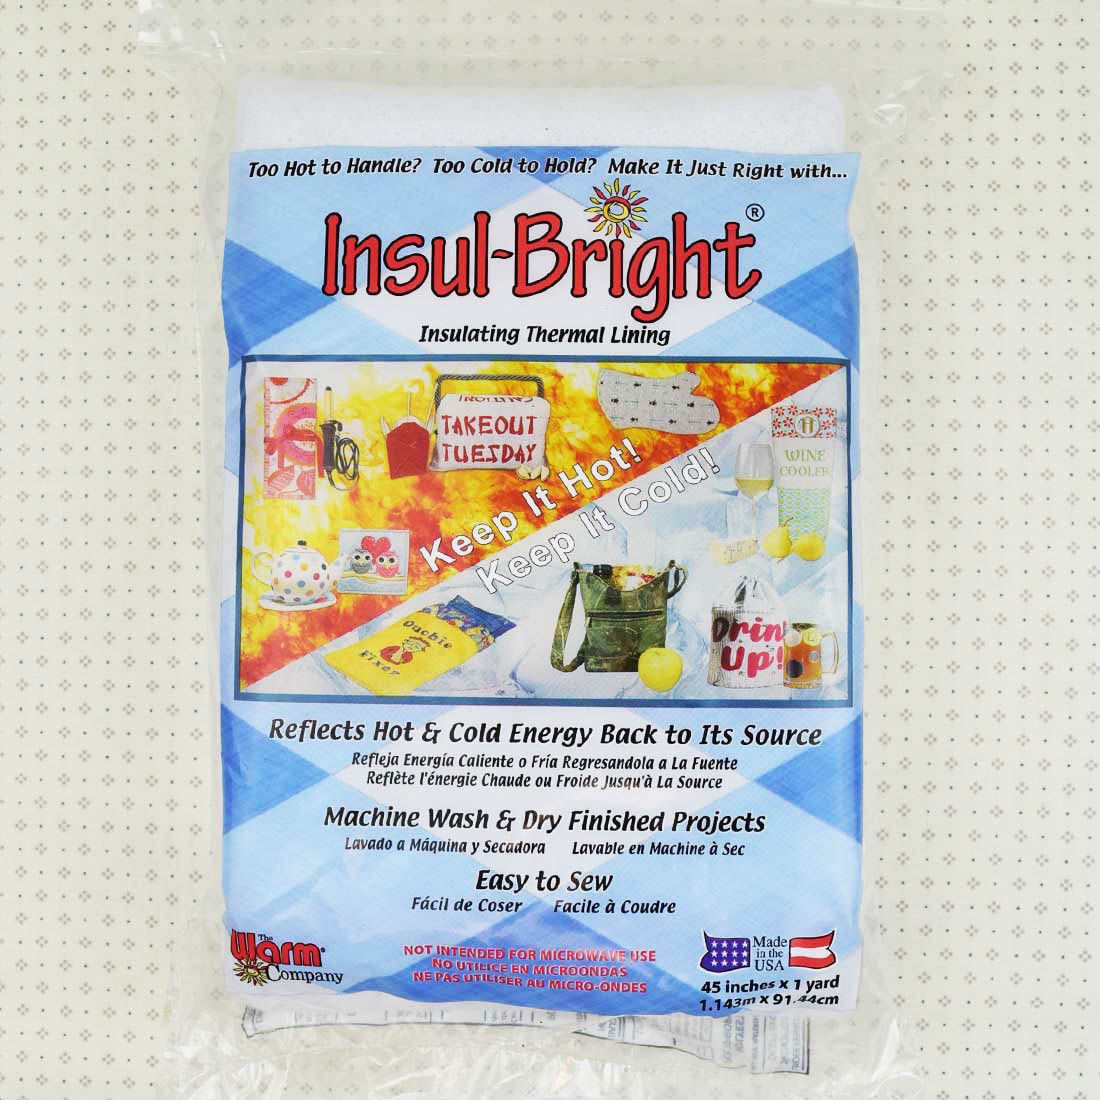 Insul-Bright Thermal Lining